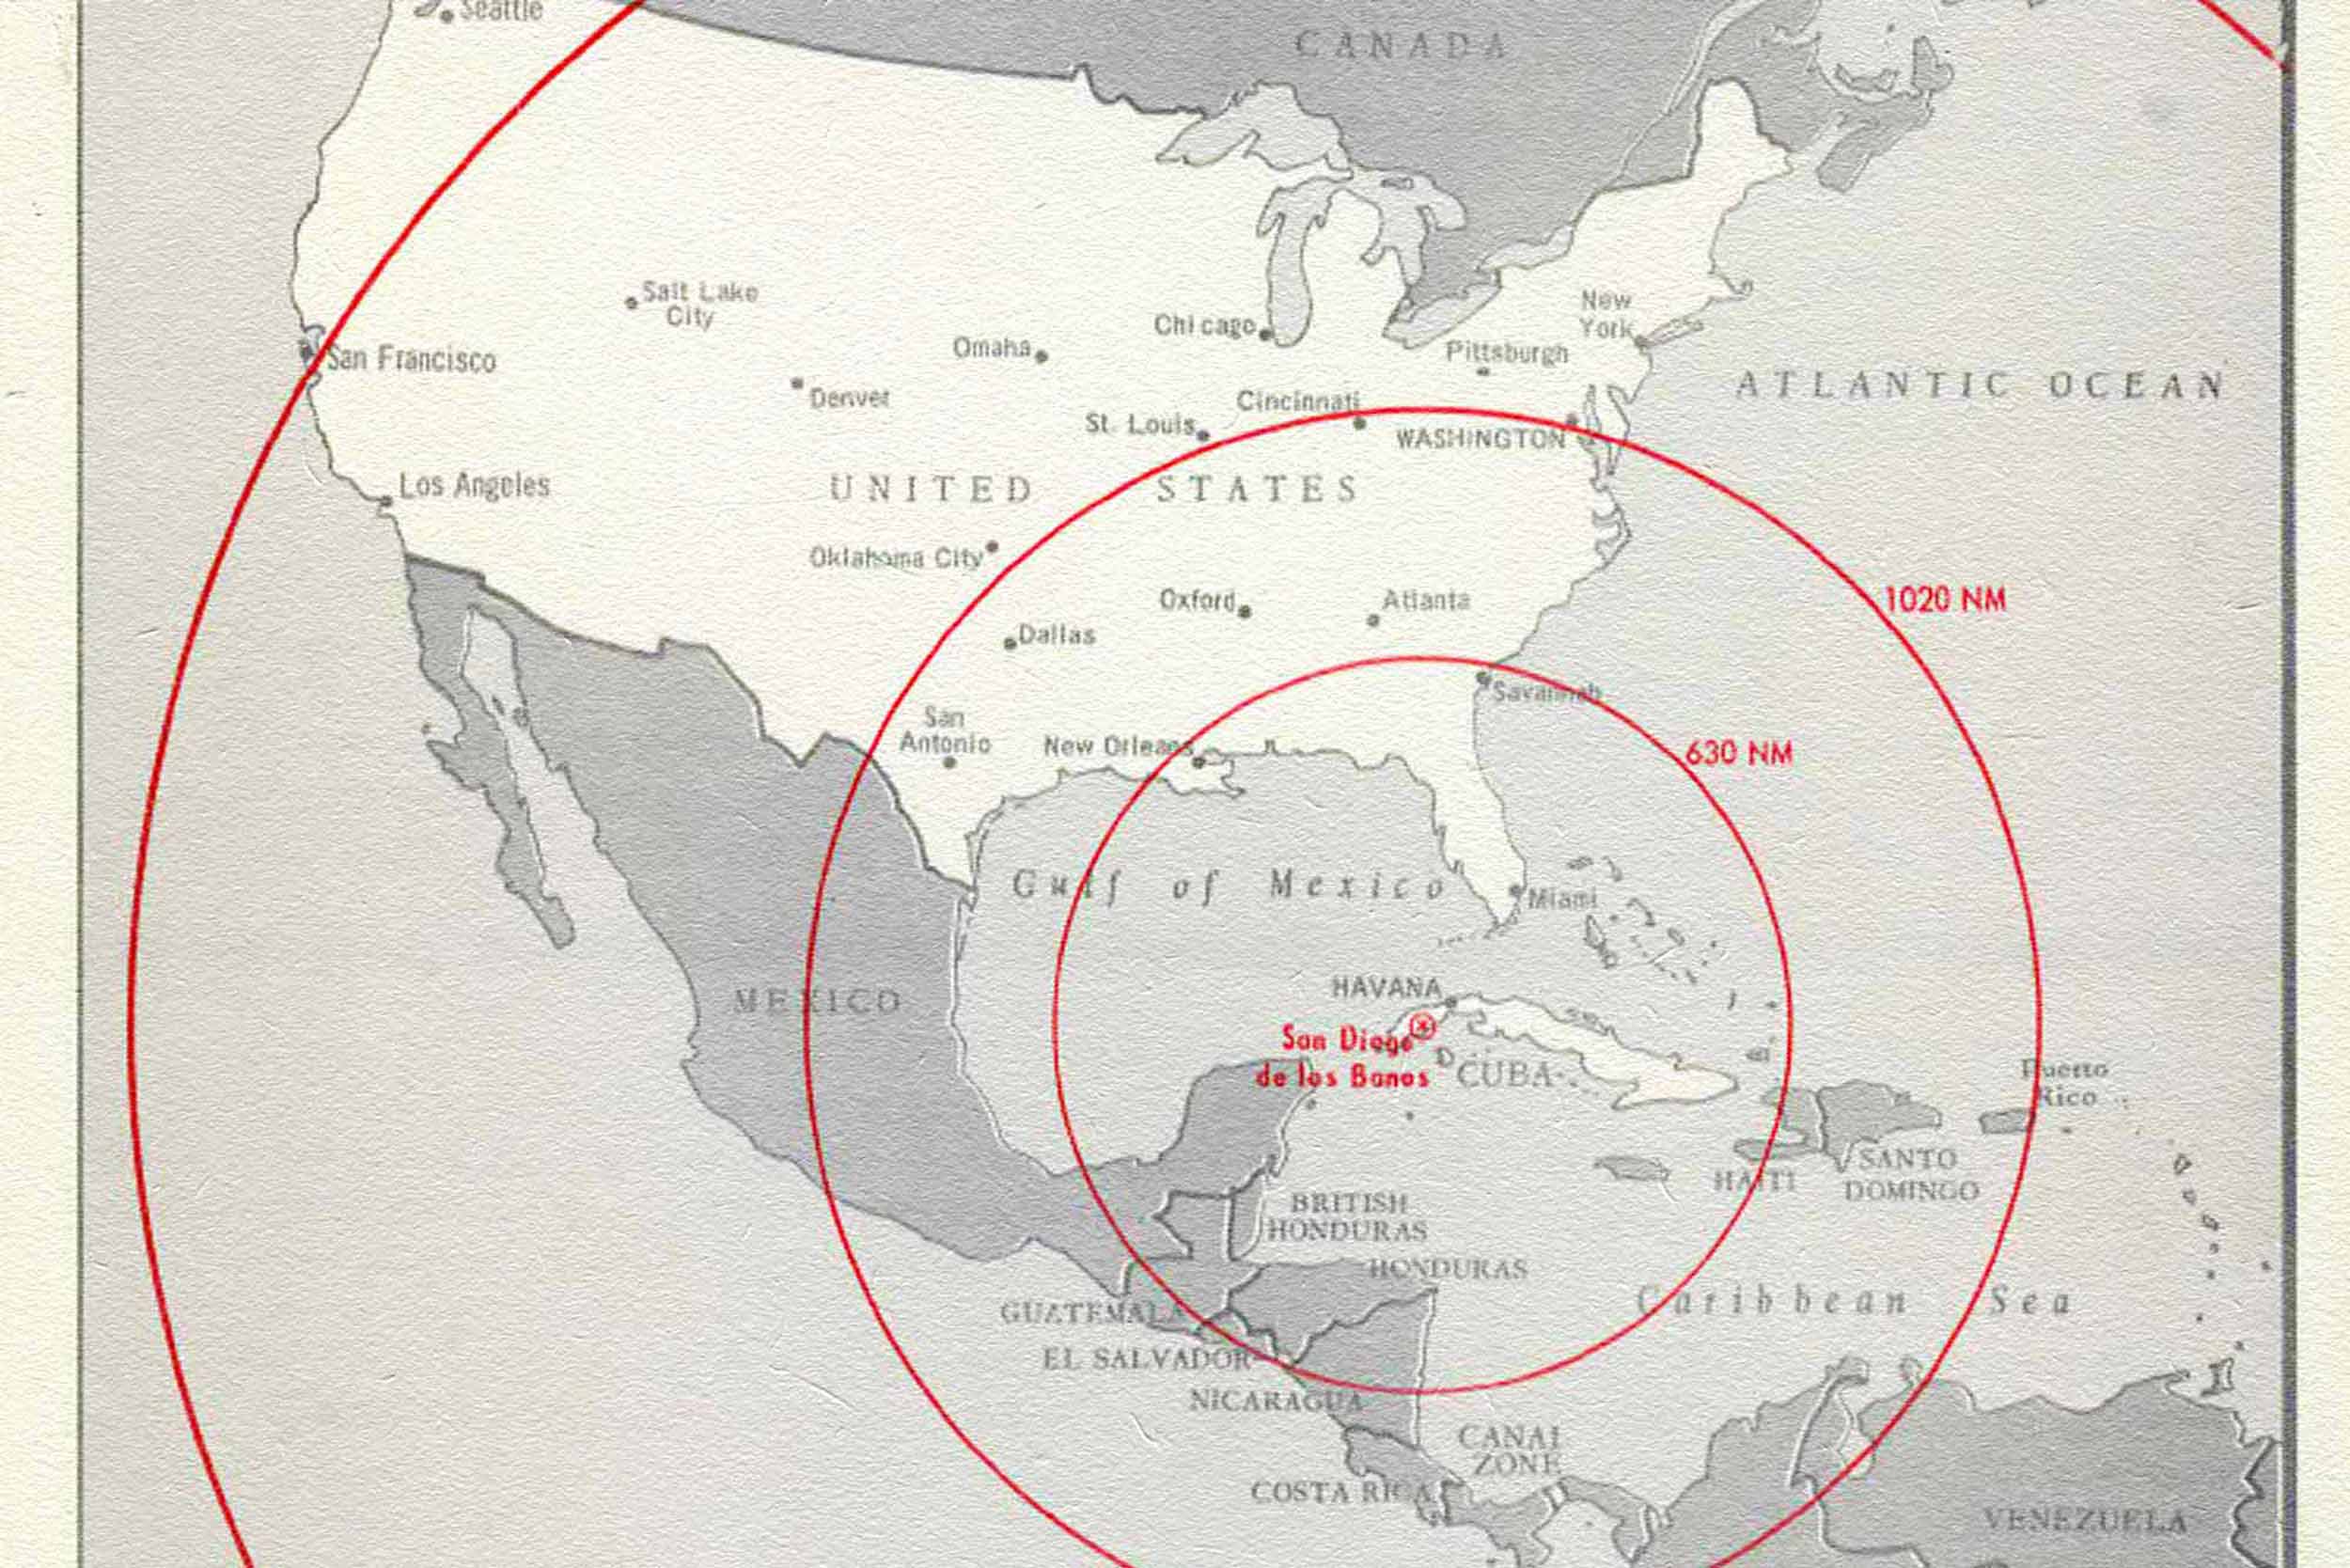 Concentric red circles overlaid on a map of North, Central and South America, centered on Cuba